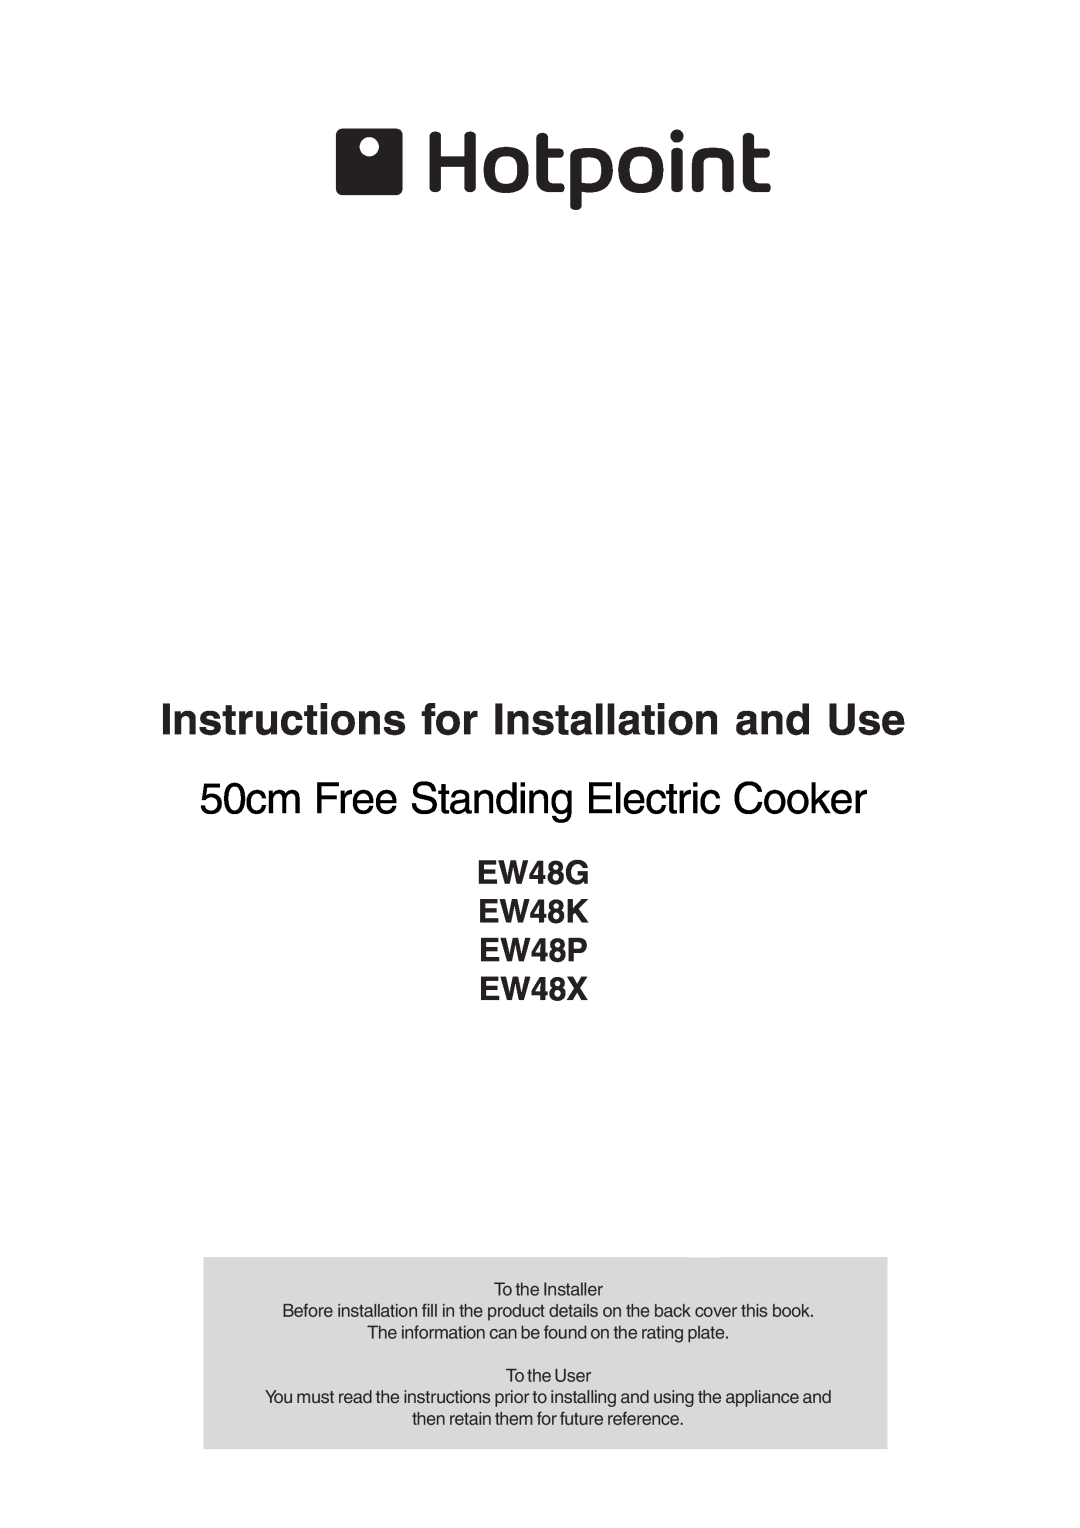 Hotpoint manual EW48G EW48K EW48P EW48X, Instructions for Installation and Use, 50cm Free Standing Electric Cooker 